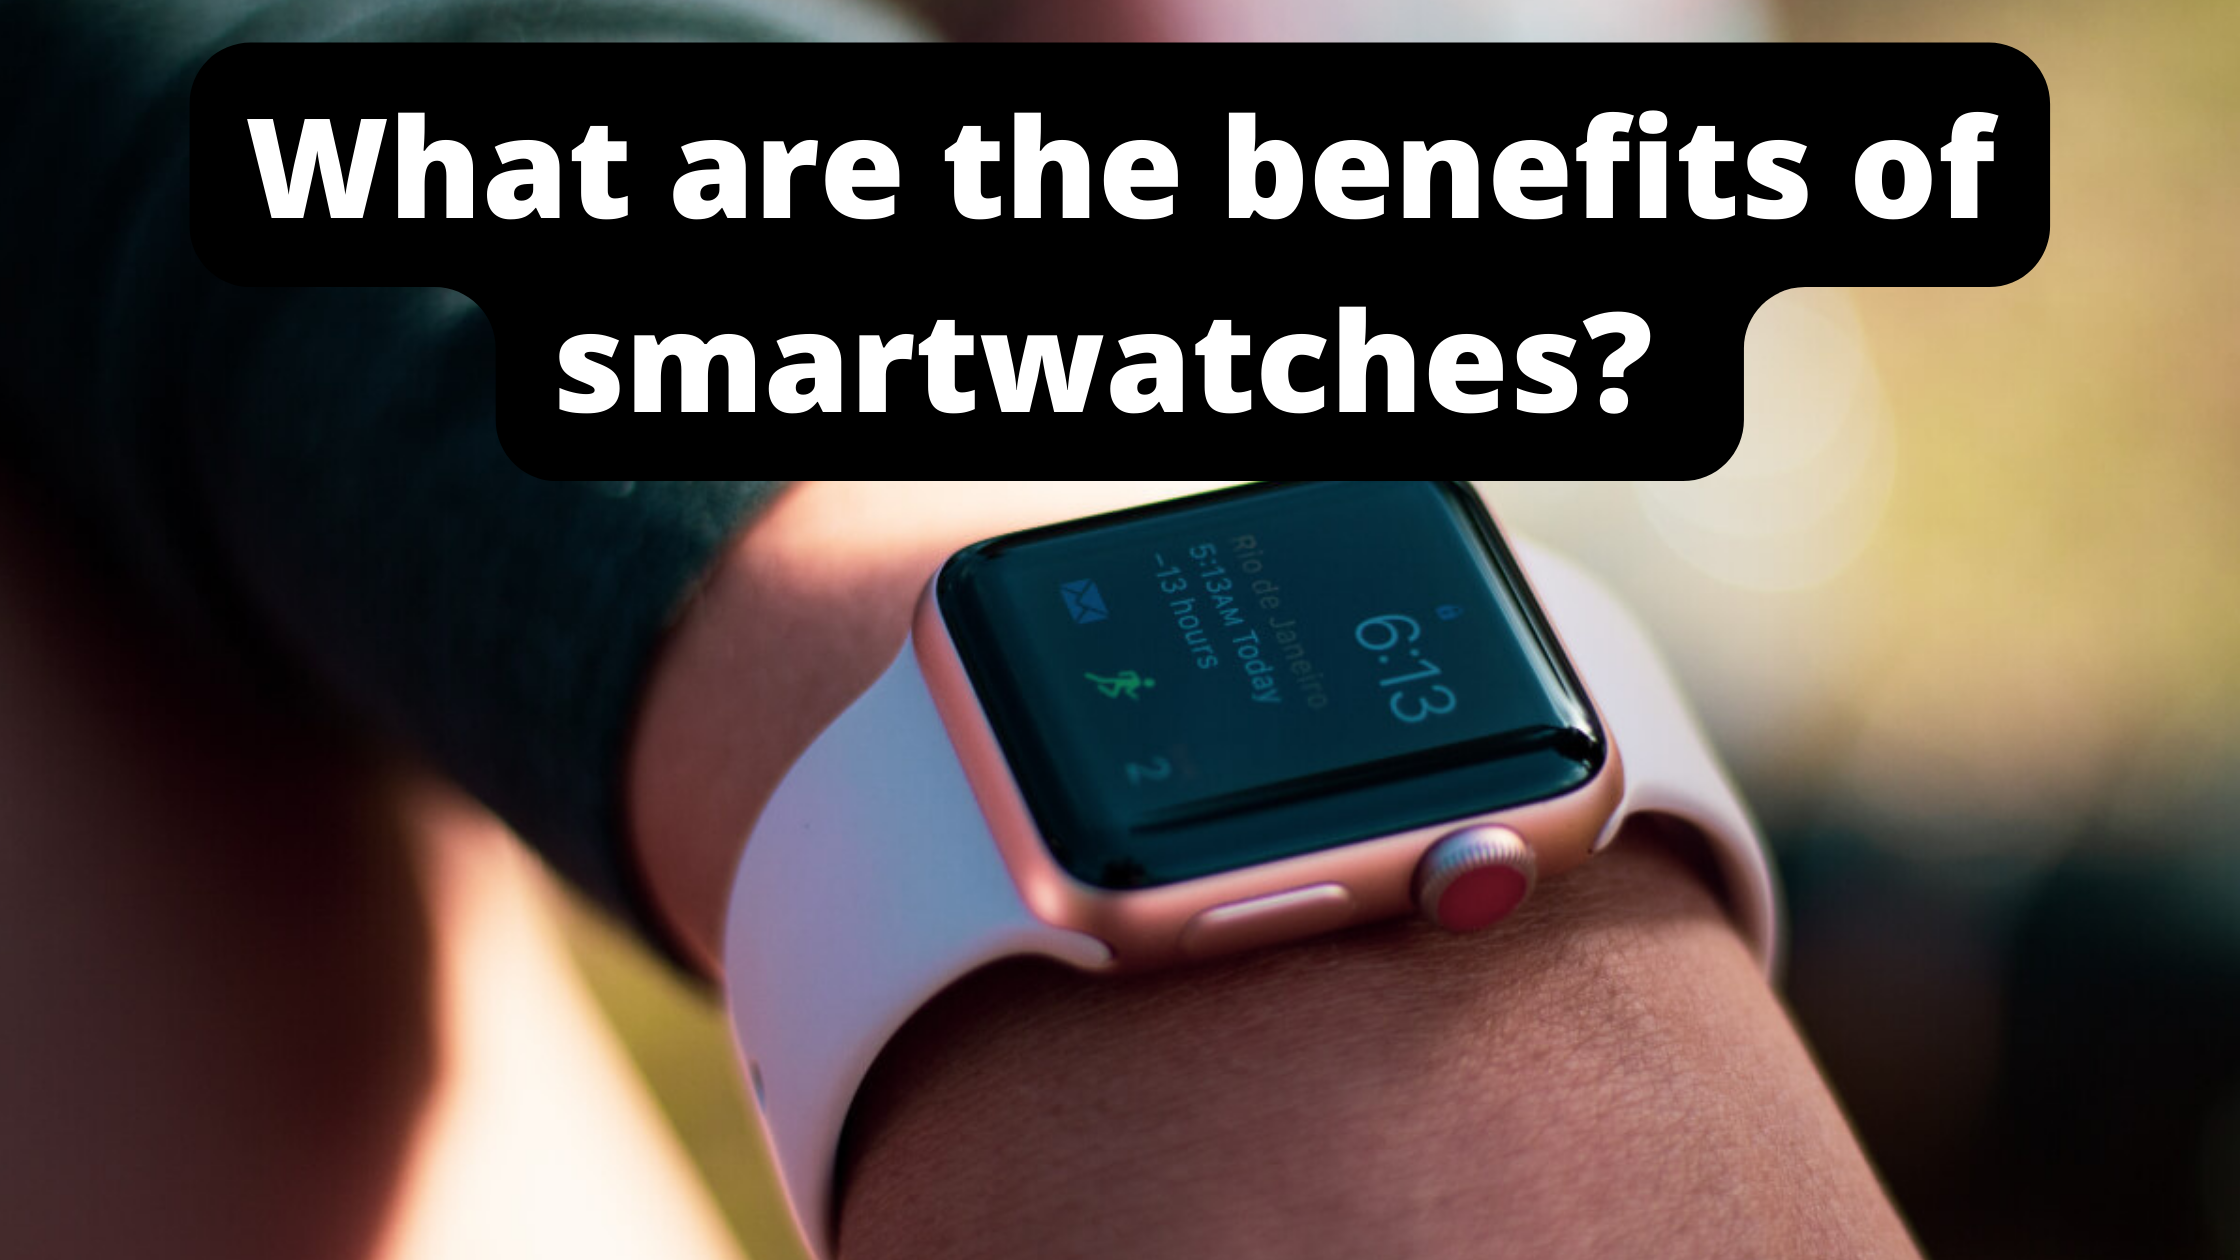 What are the benefits of smartwatches?